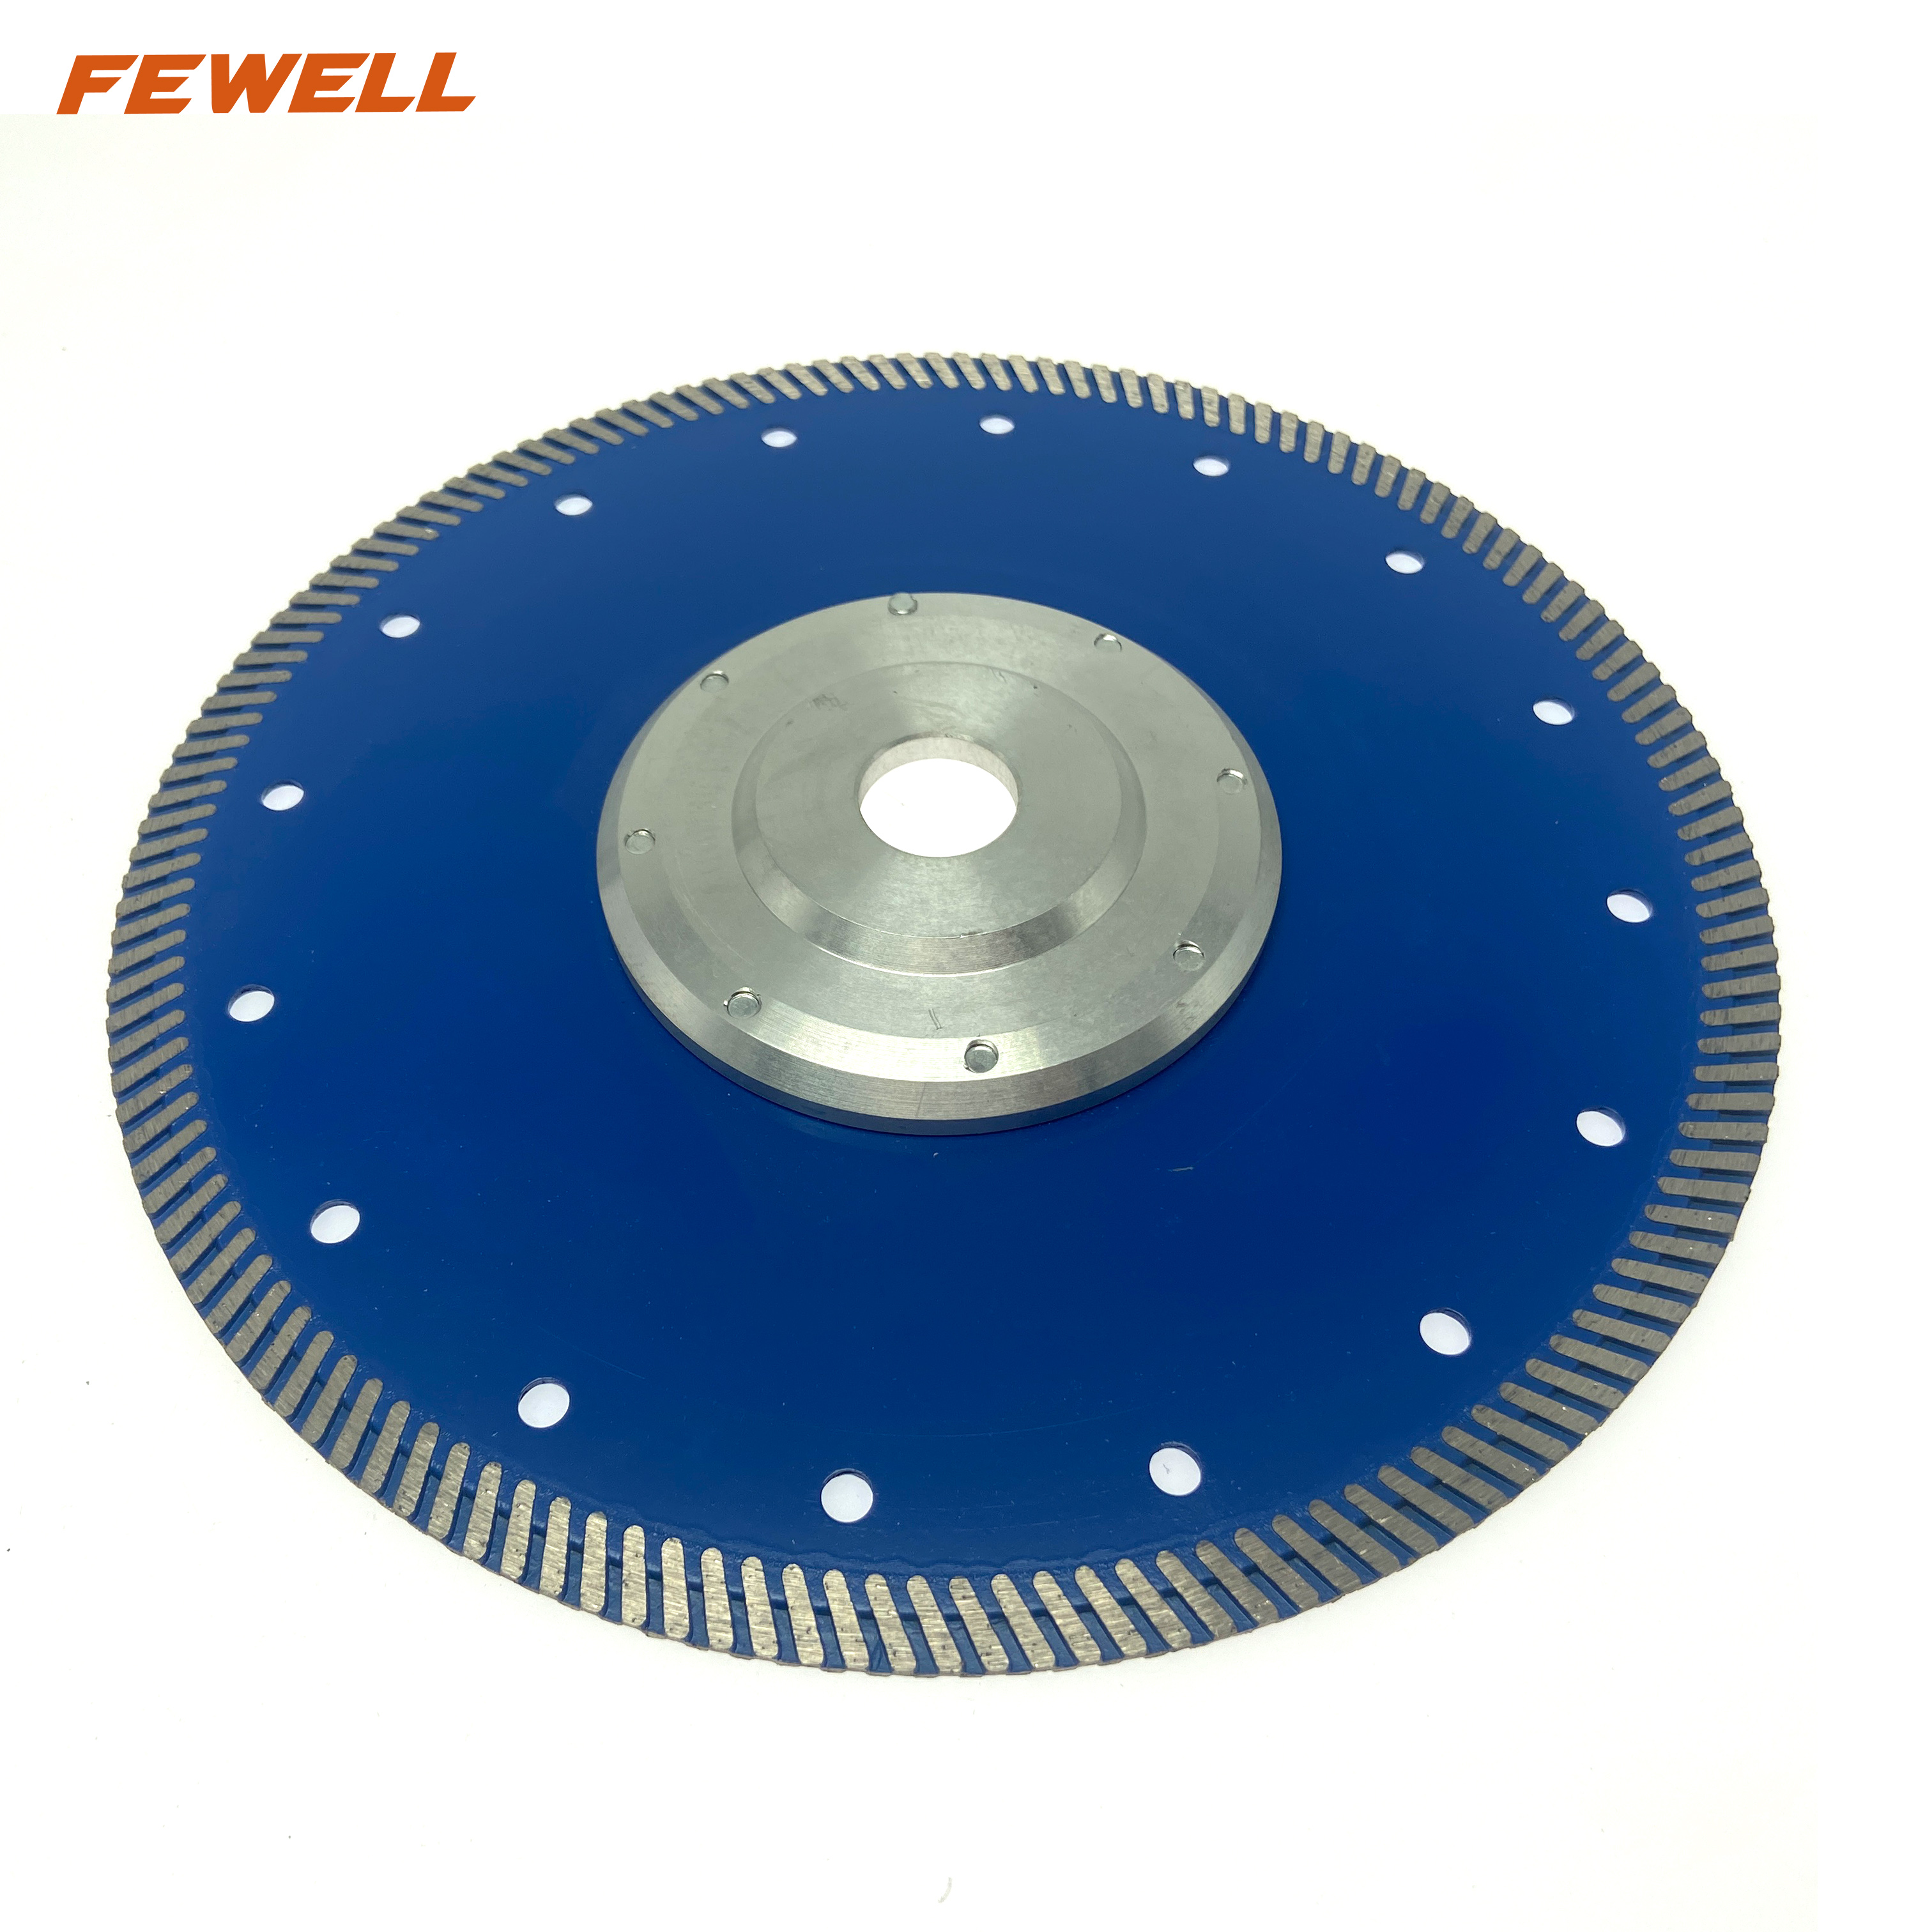 High quality Hot Press 9inch 230*2.6*10*70mm with 22.23mm aluminum flange center diamond turbo saw blade for cutting granite